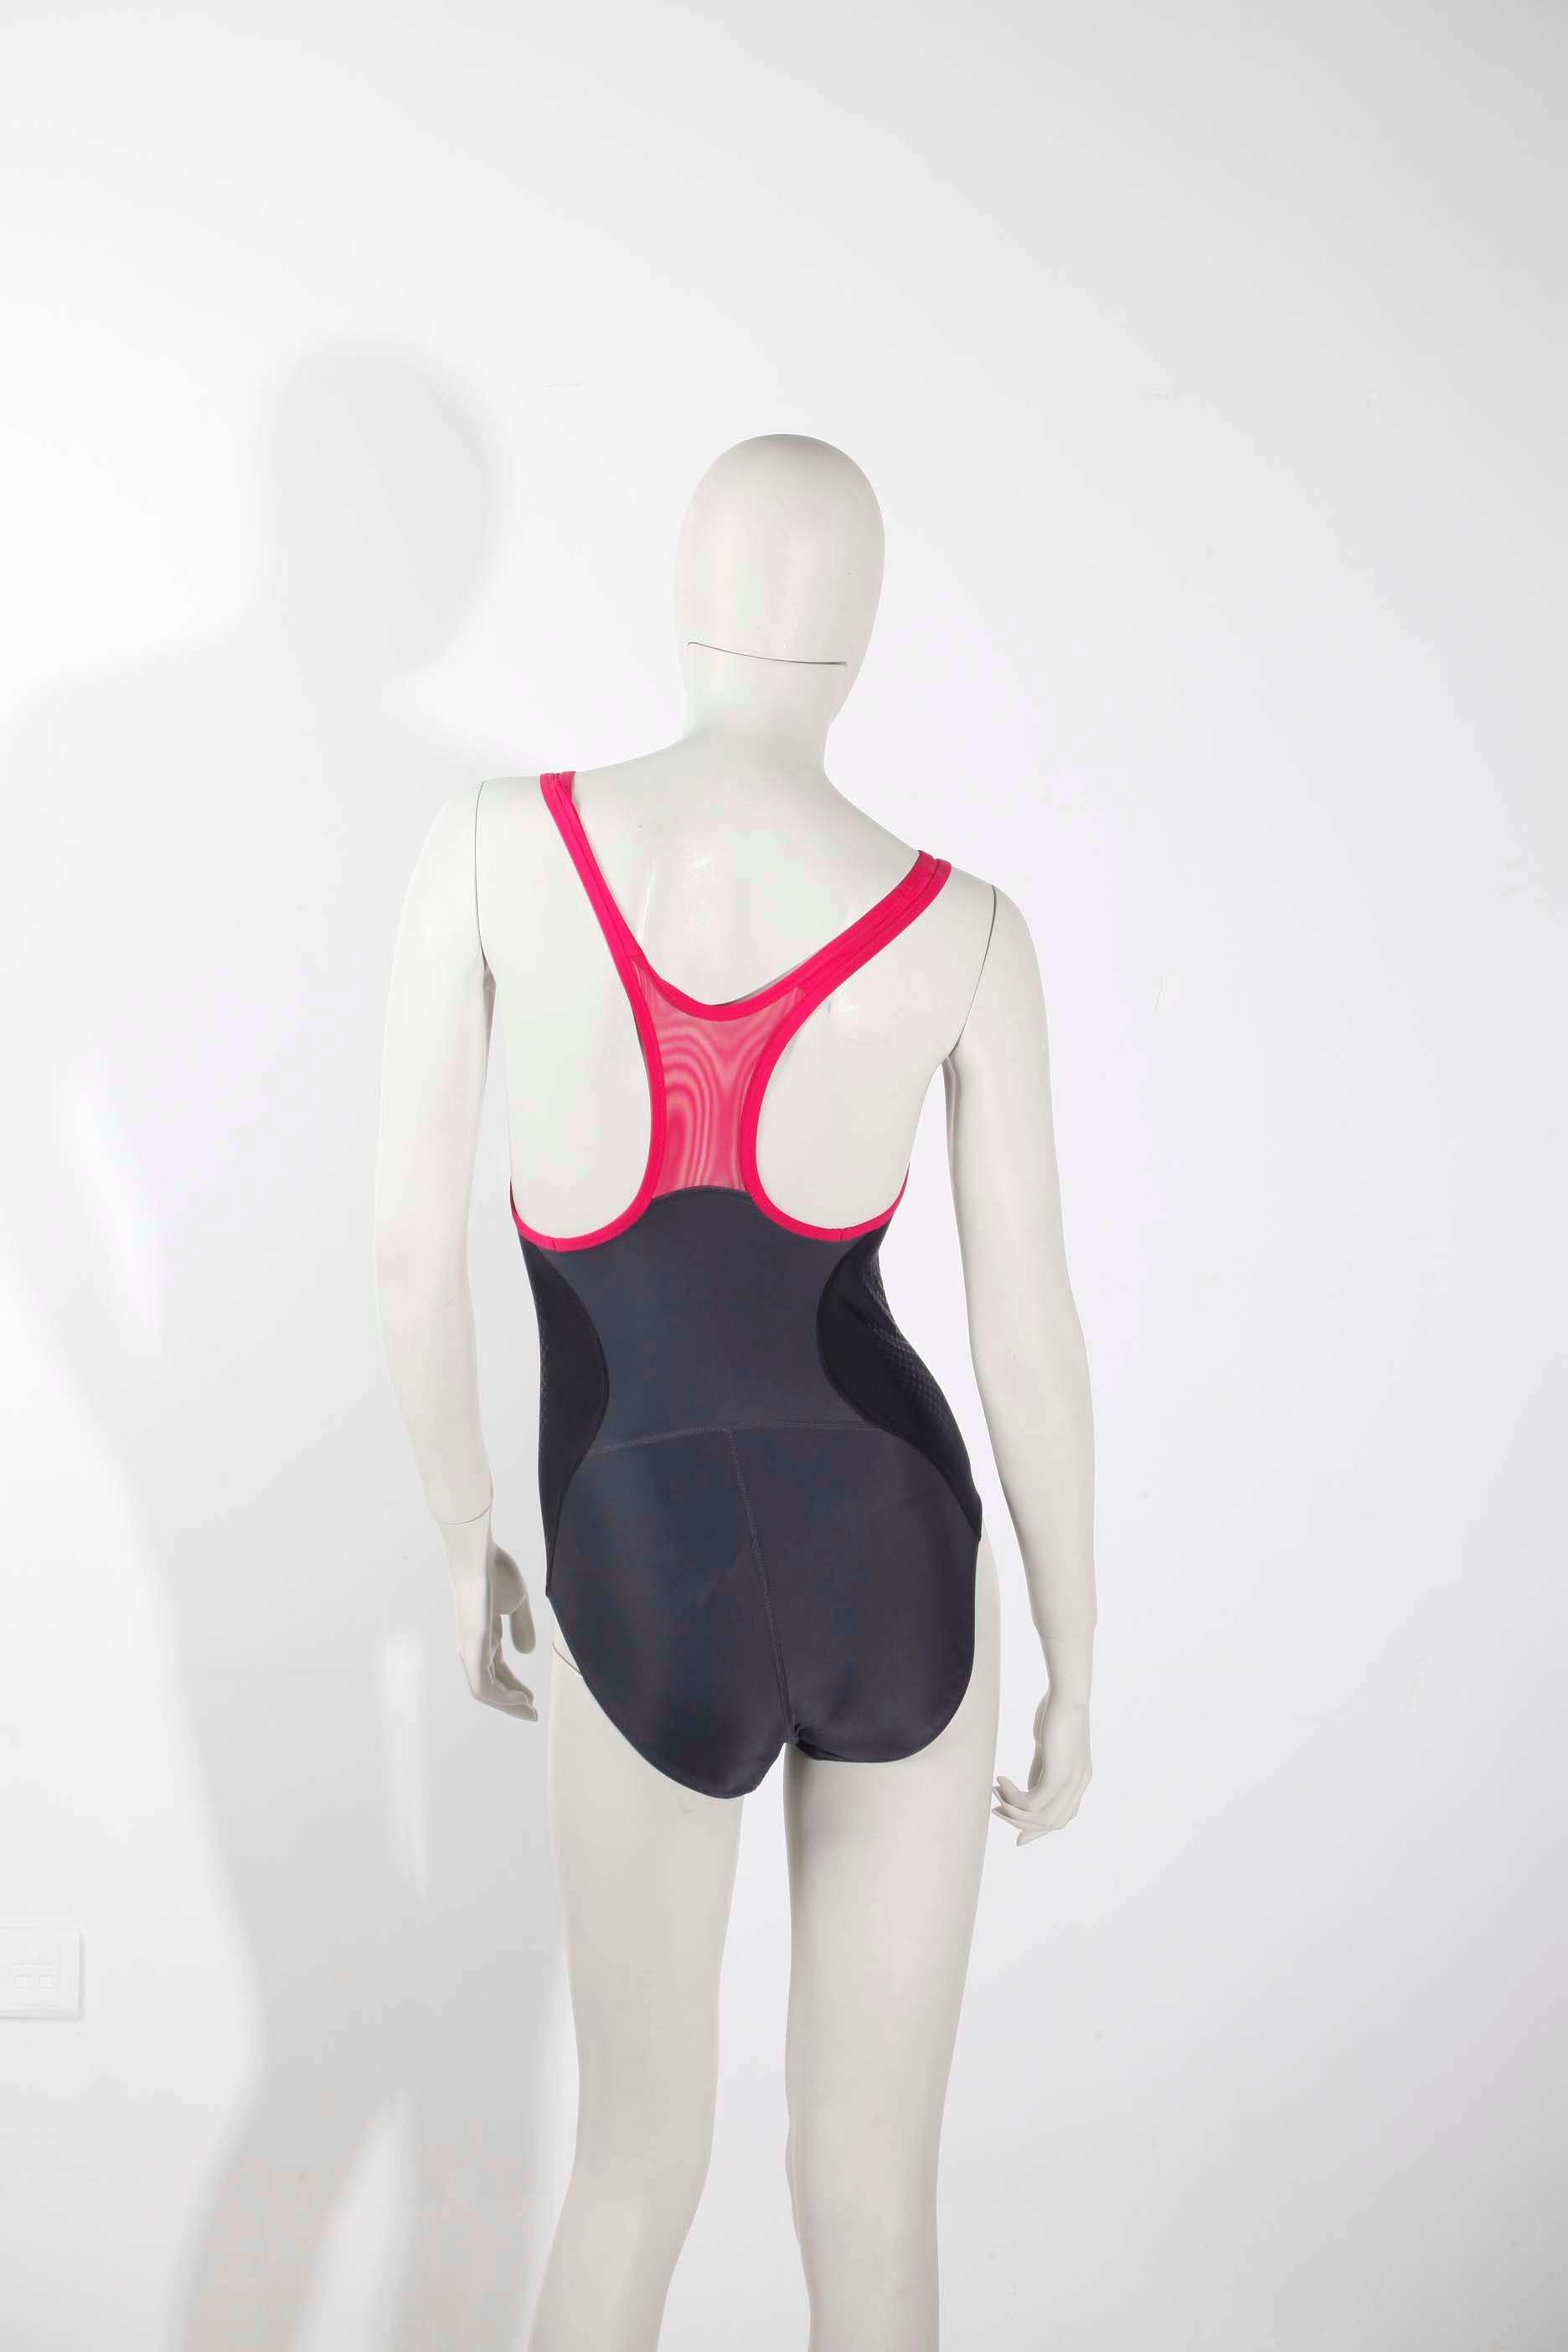 Speedo Pink and Black Swimsuit (small)